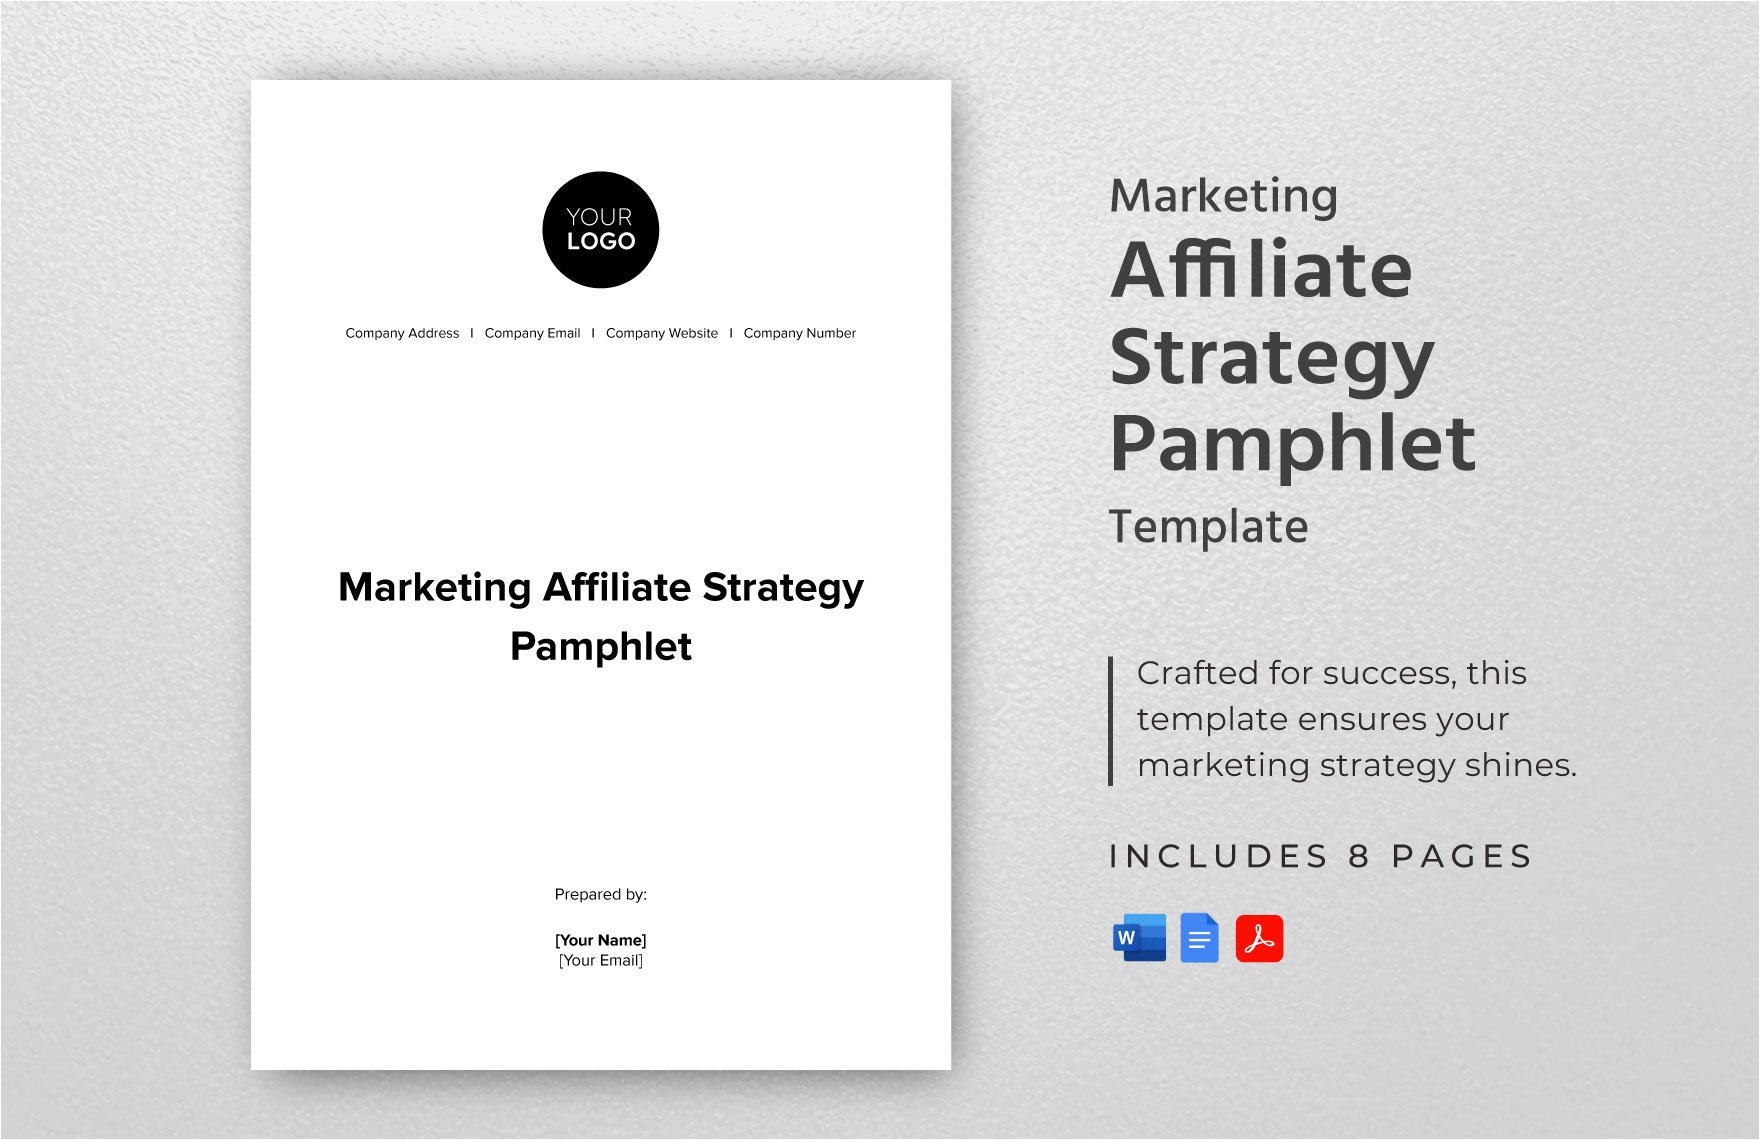 Marketing Affiliate Strategy Pamphlet Template in Word, Google Docs, PDF